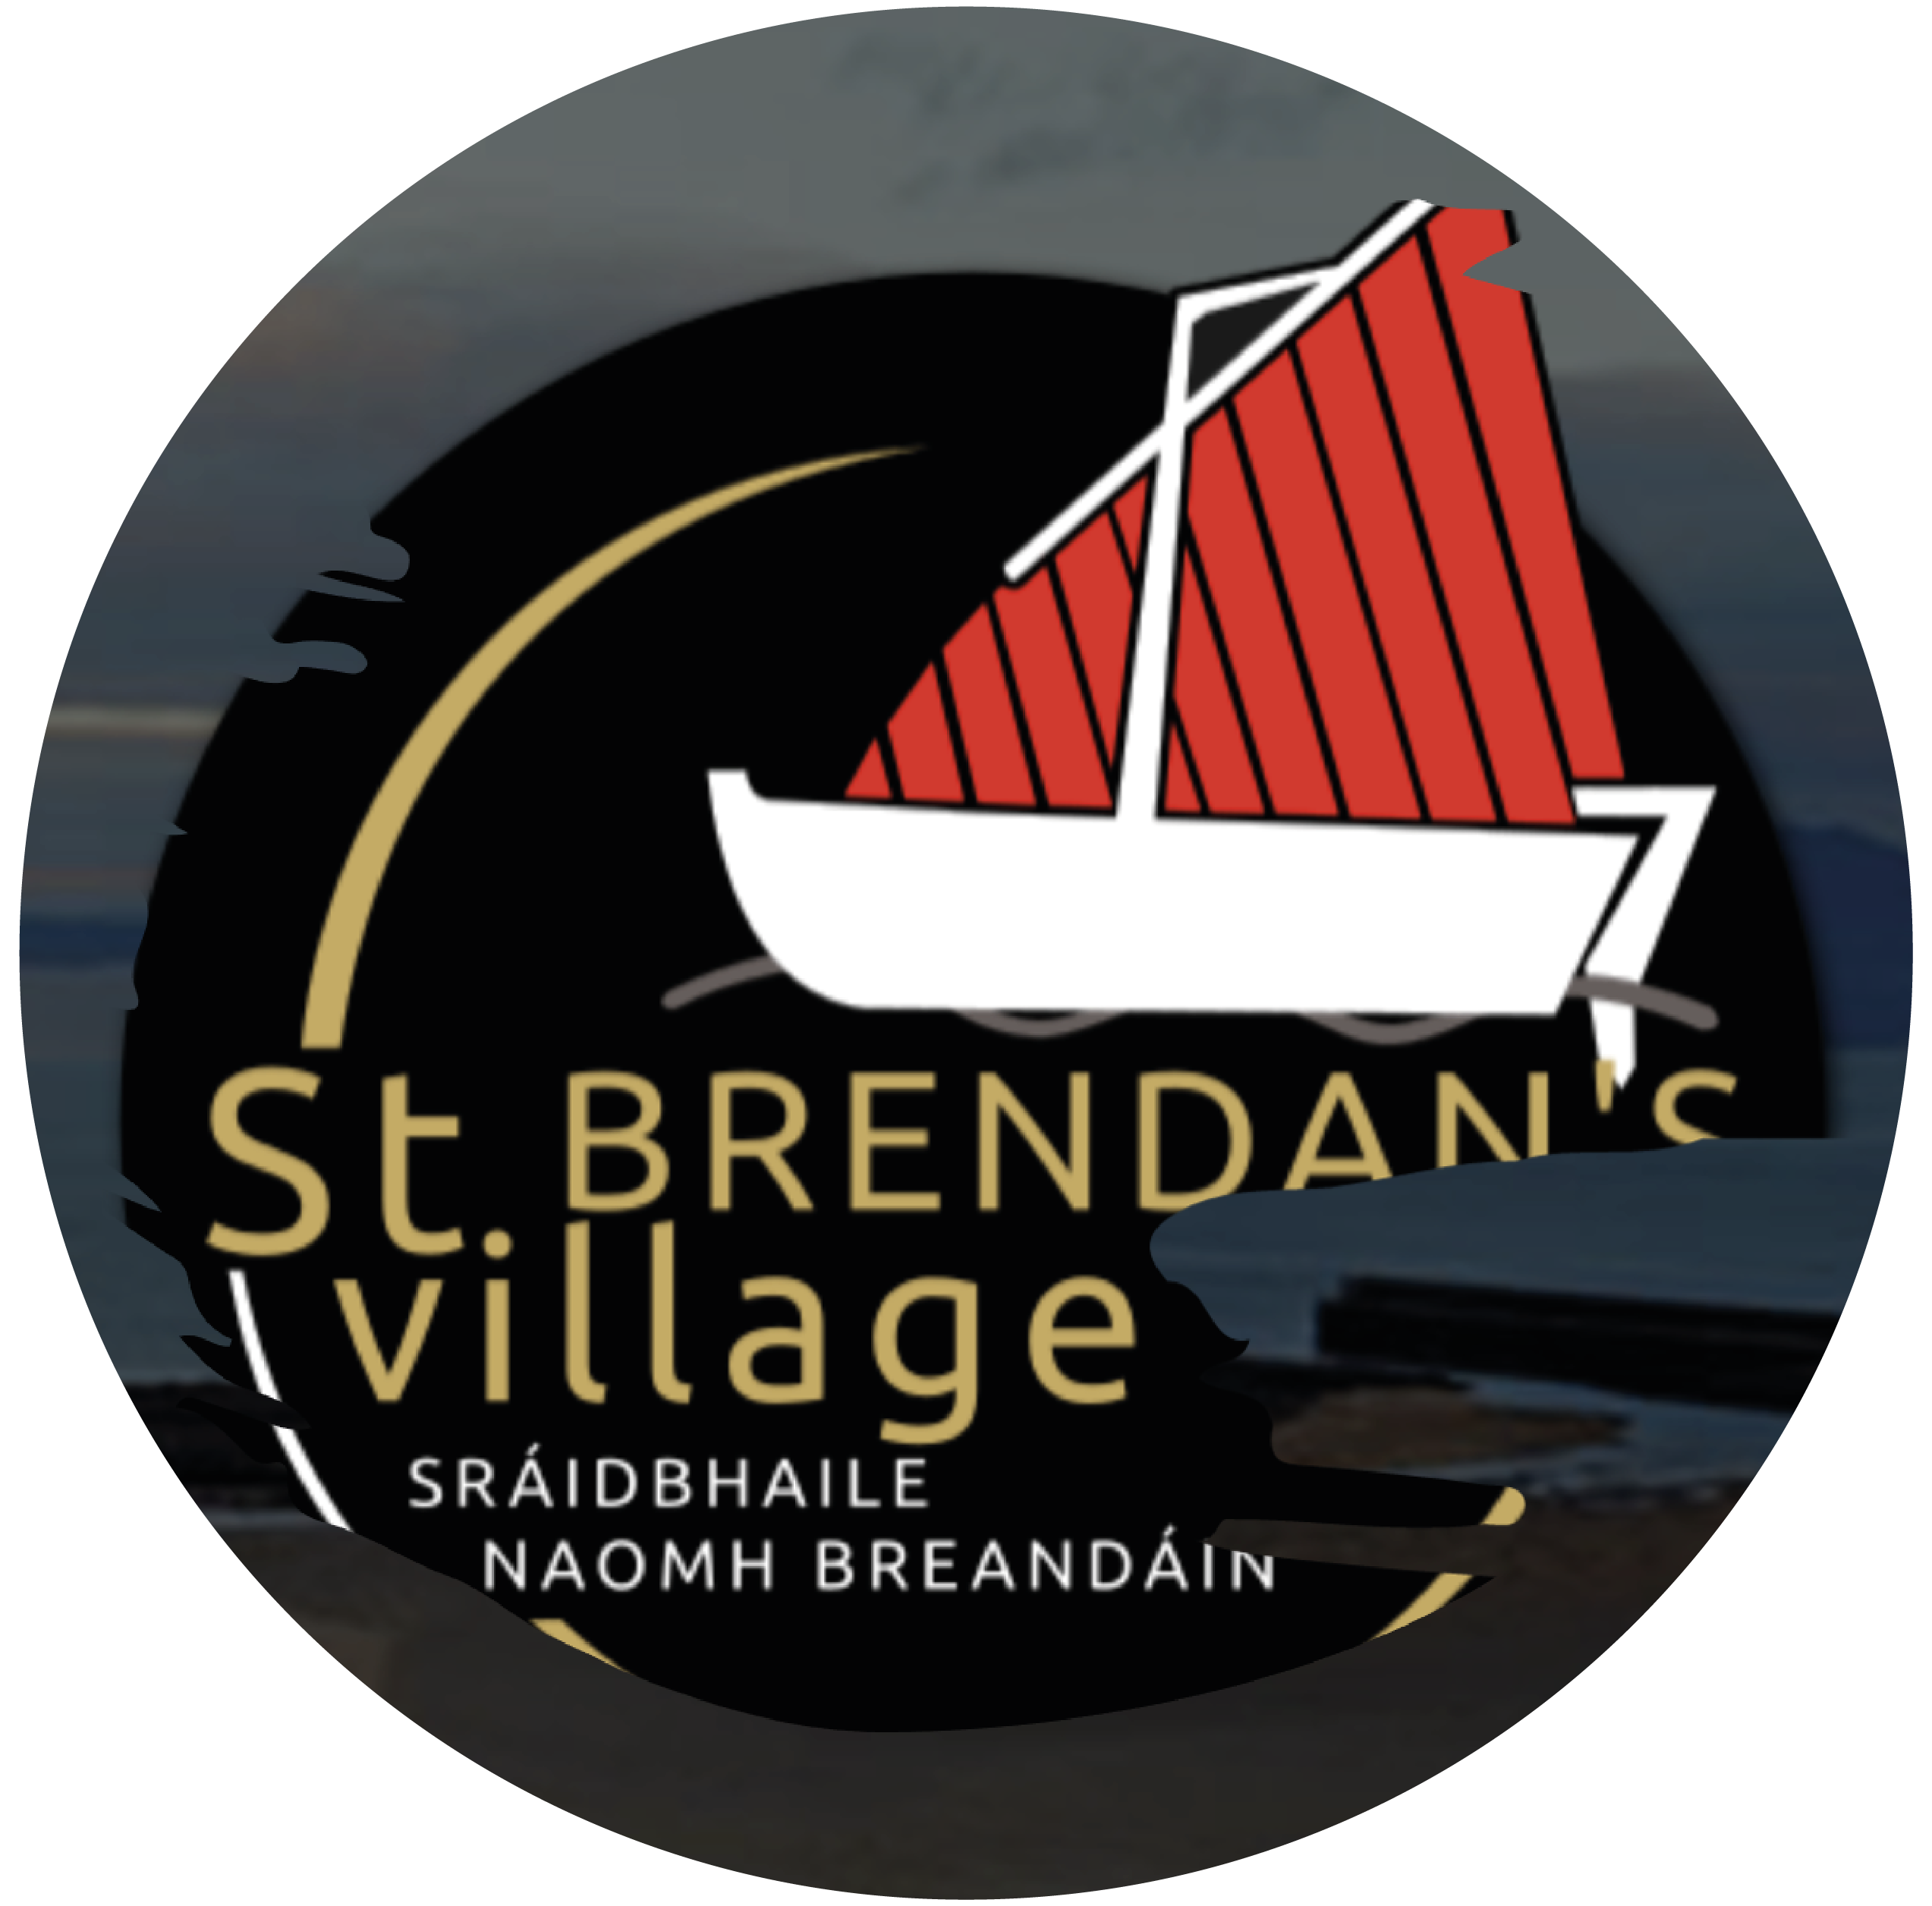 Logo of St Brendan's Village, Mulranny. It features an image of a sailboat.